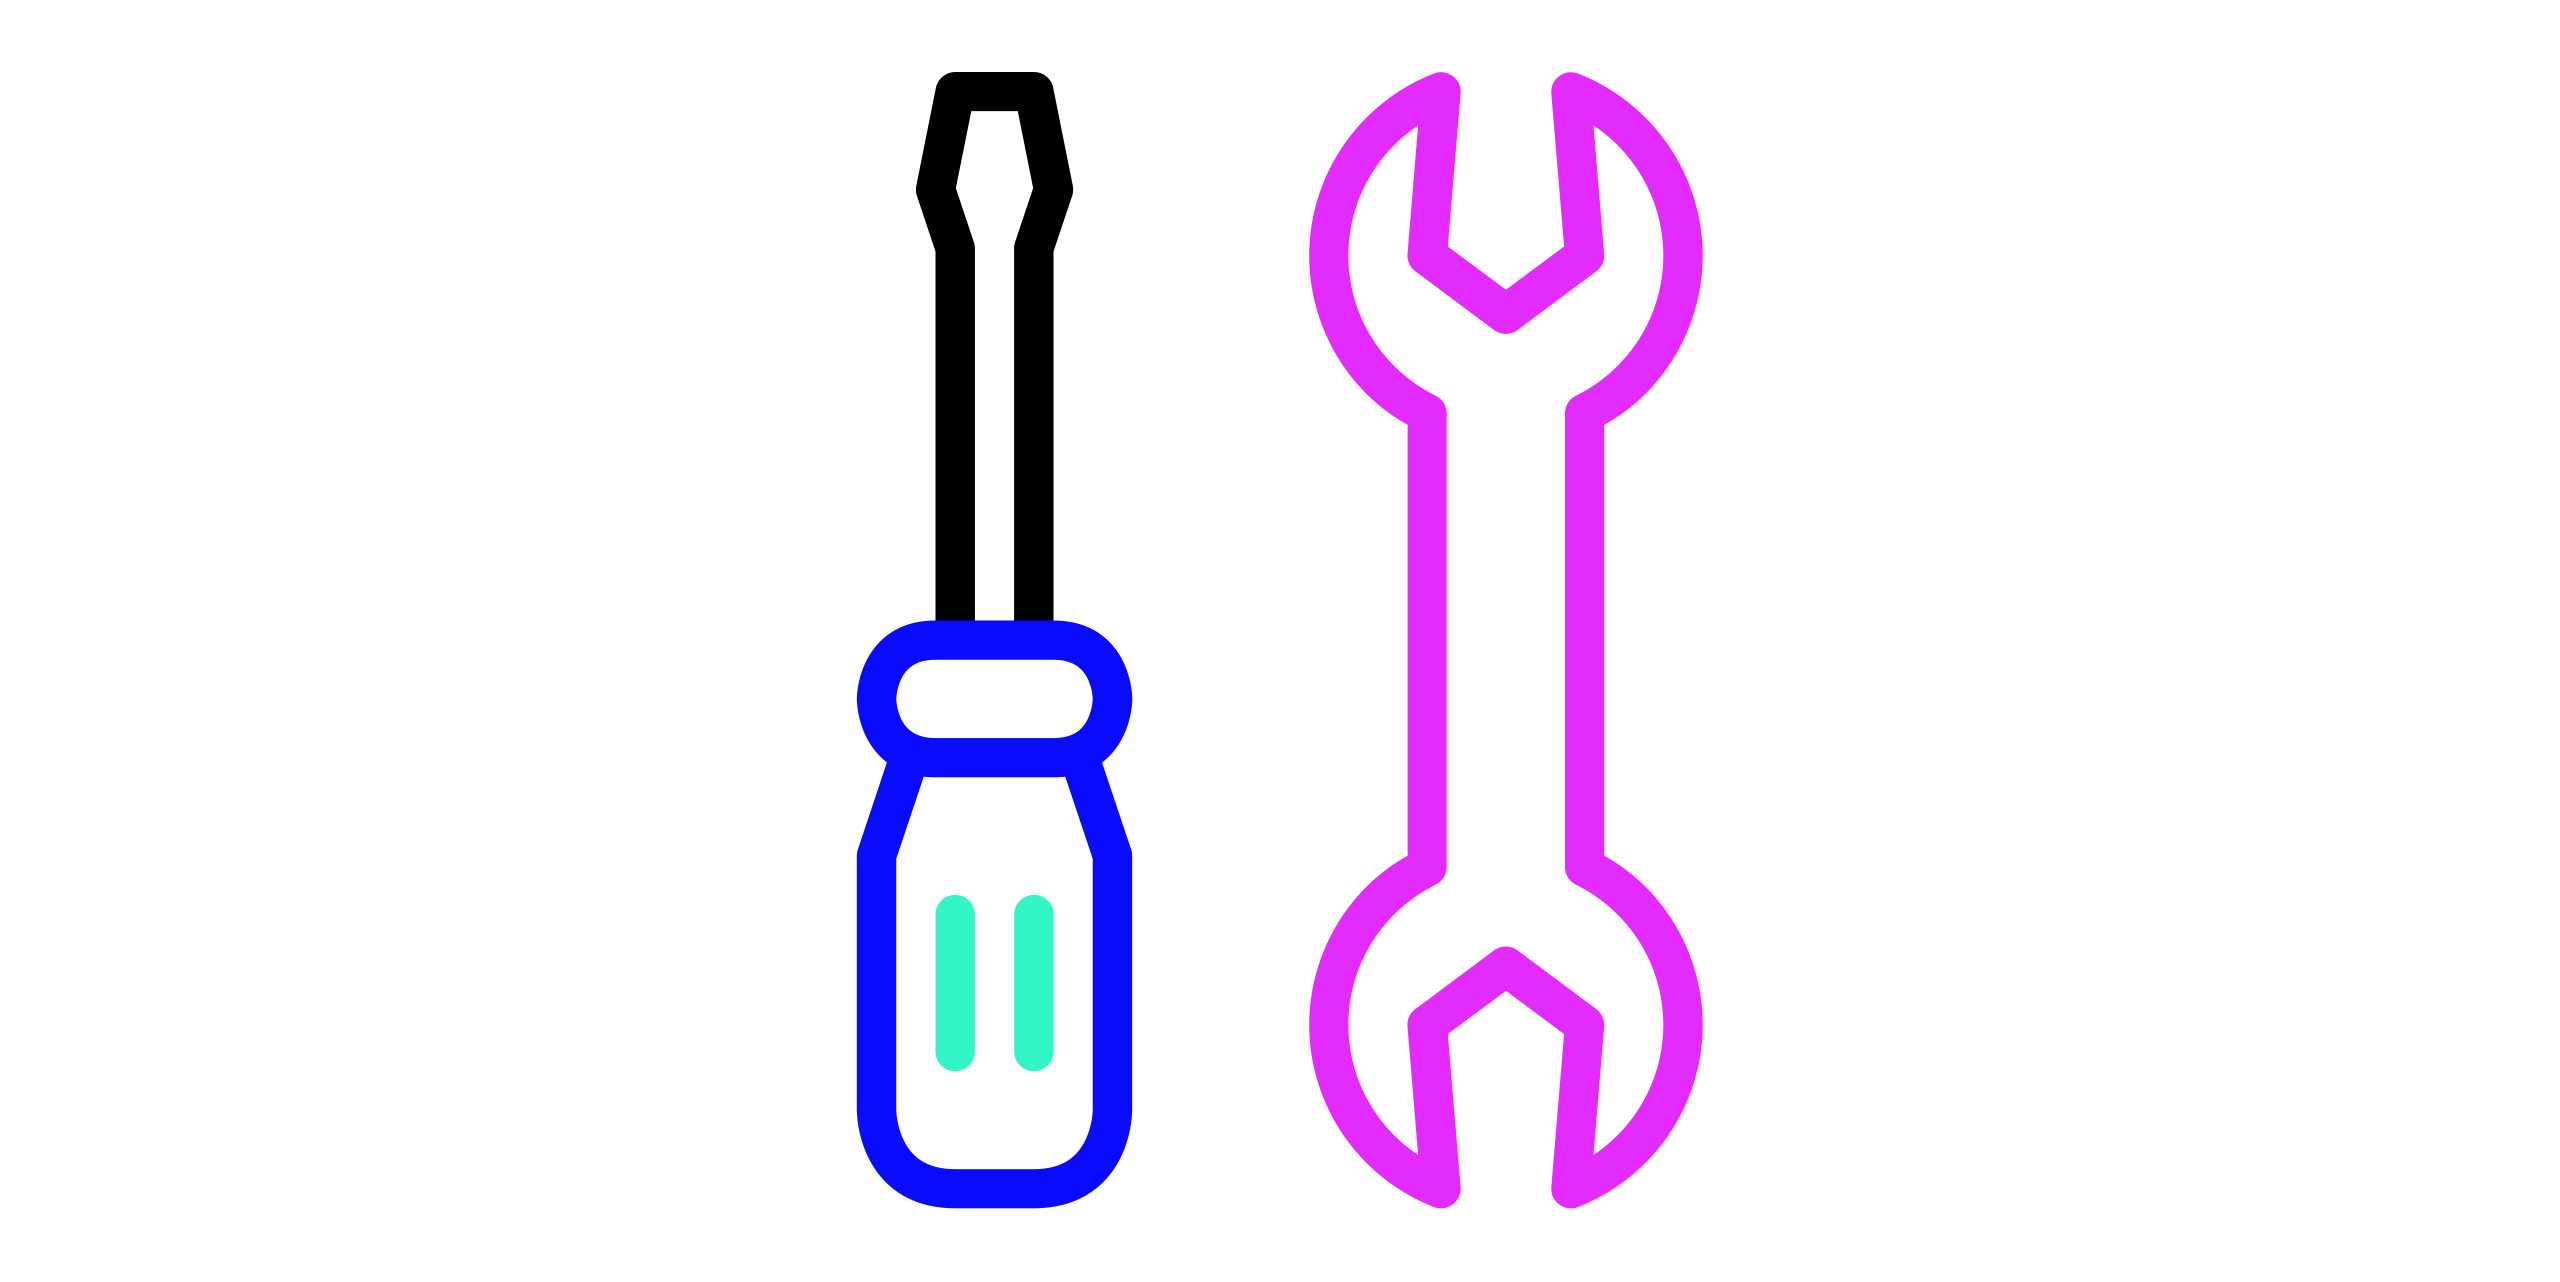 An icon featuring a screwdriver and a wrench